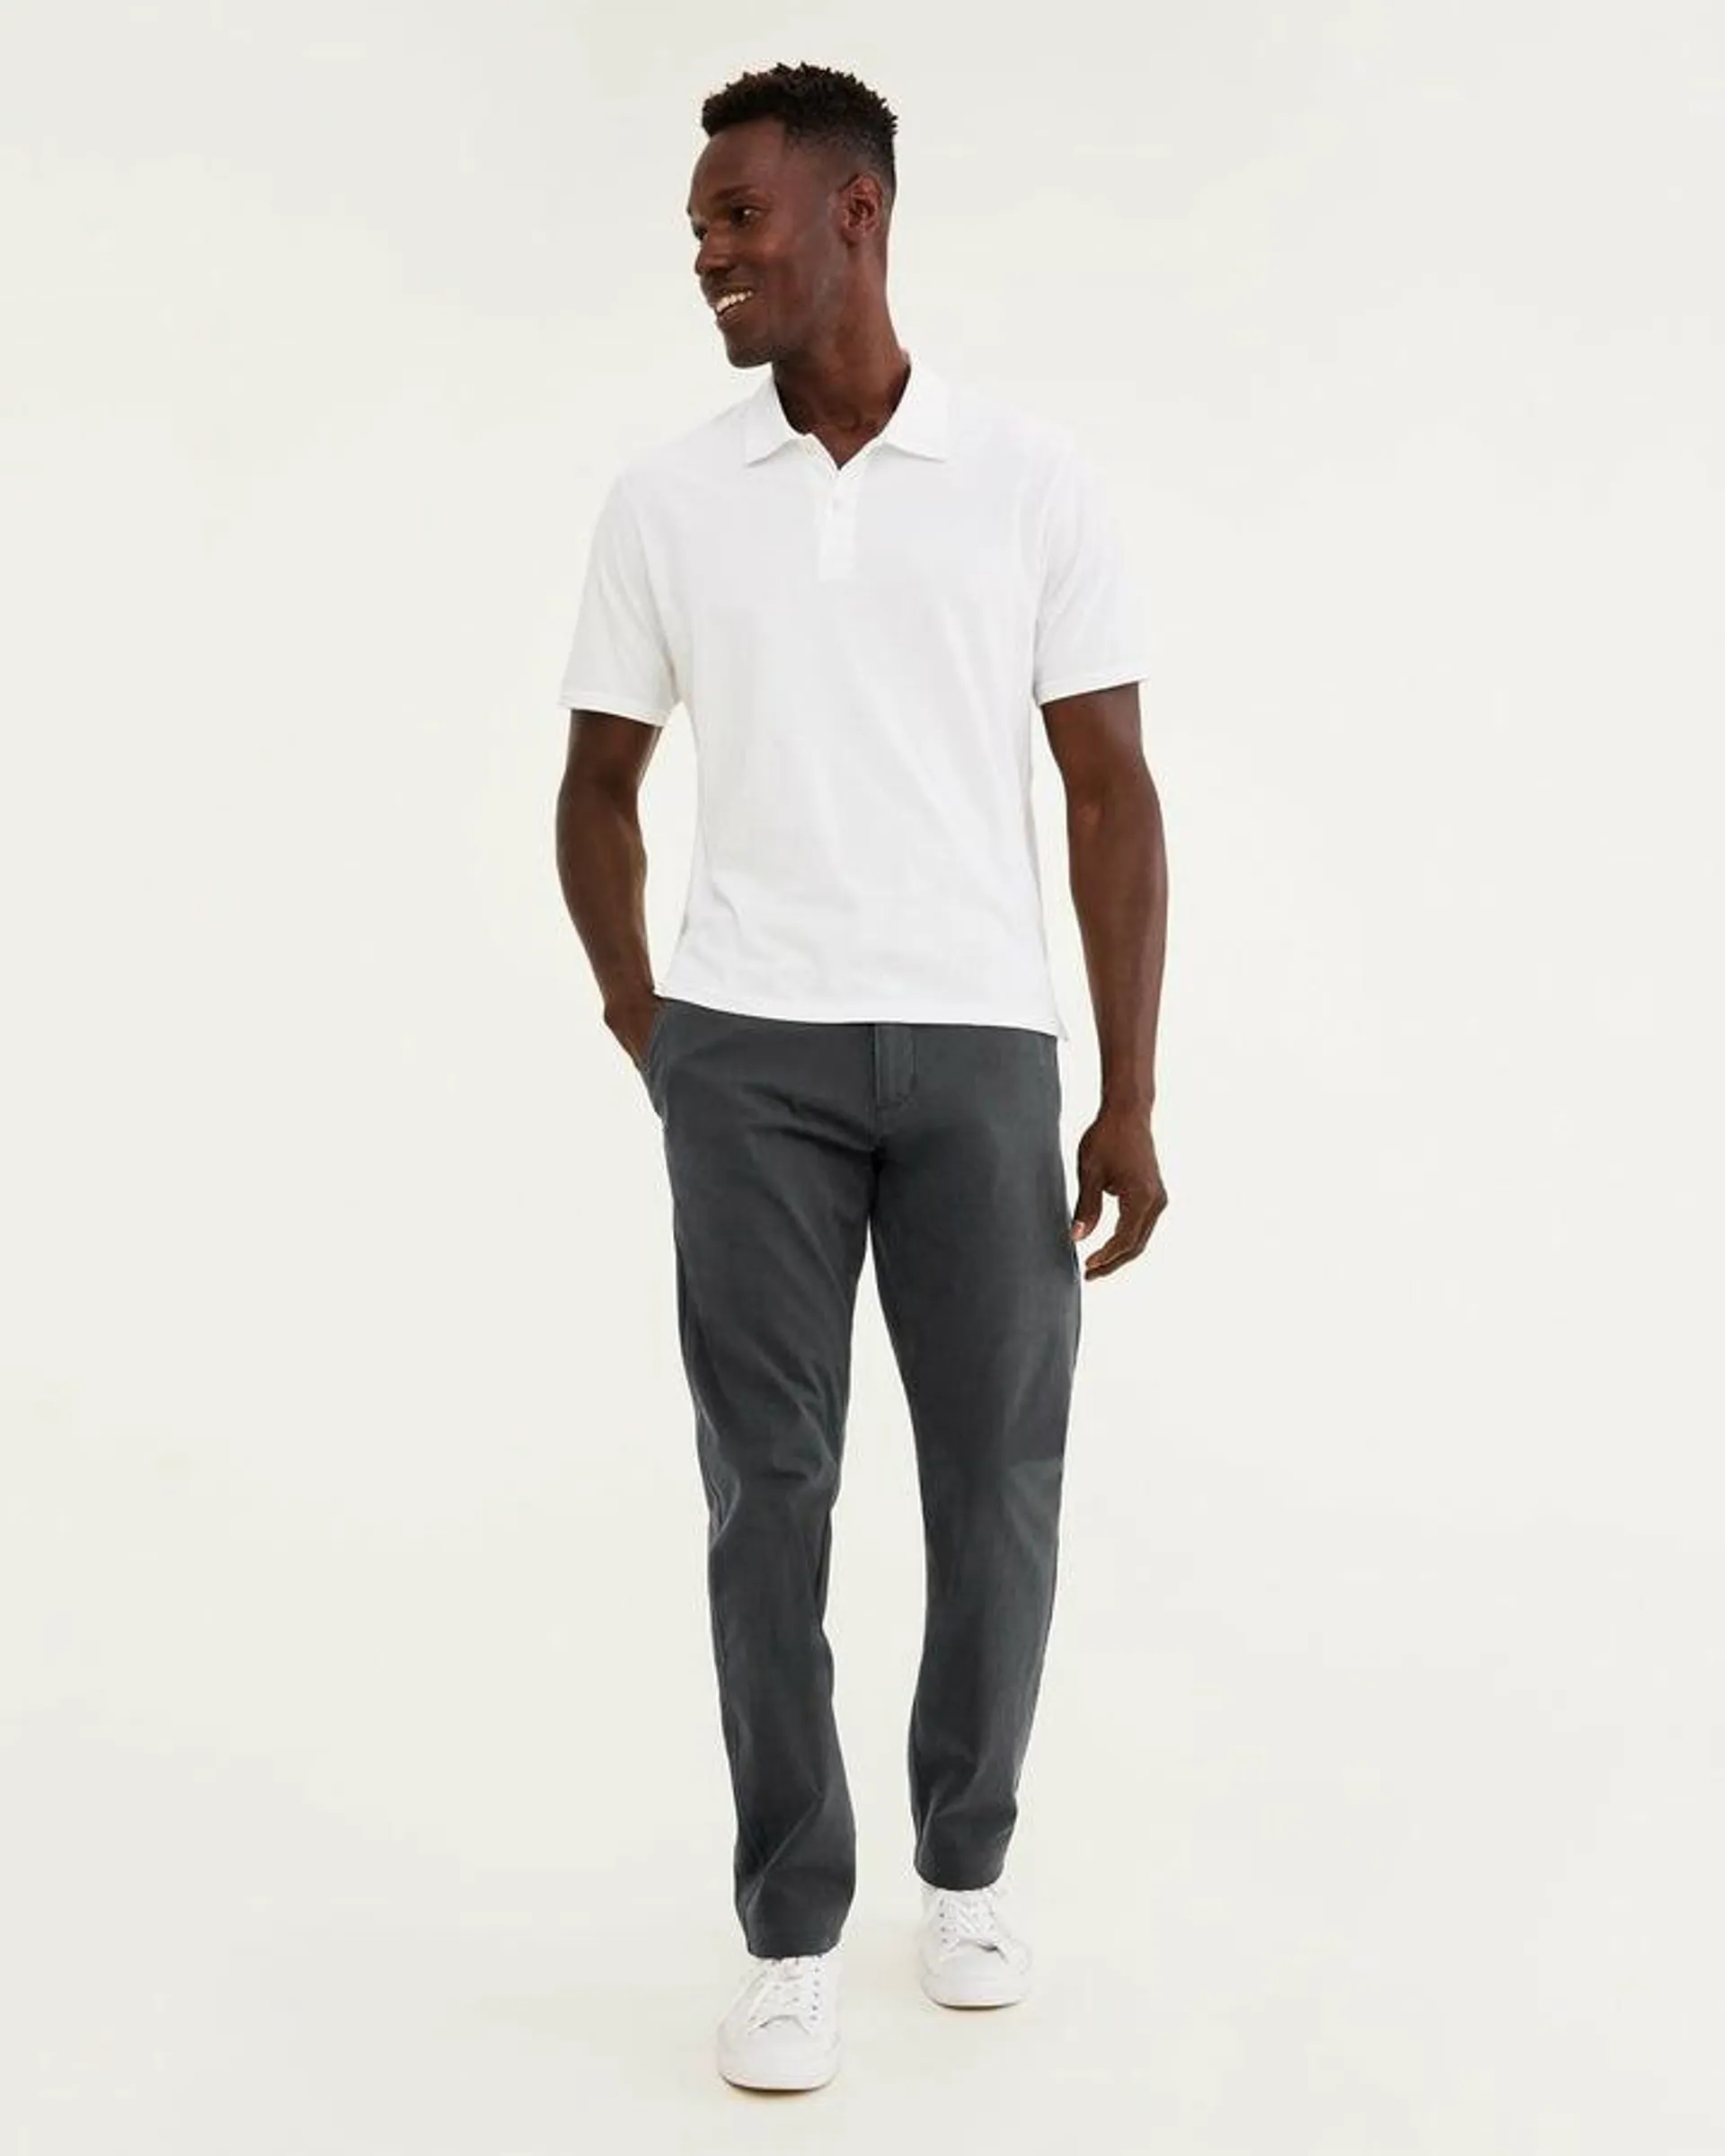 Pantalones Dockers Ultimate Chinos,Atléticos Fit Hombre Gris | ZCGTQ4913